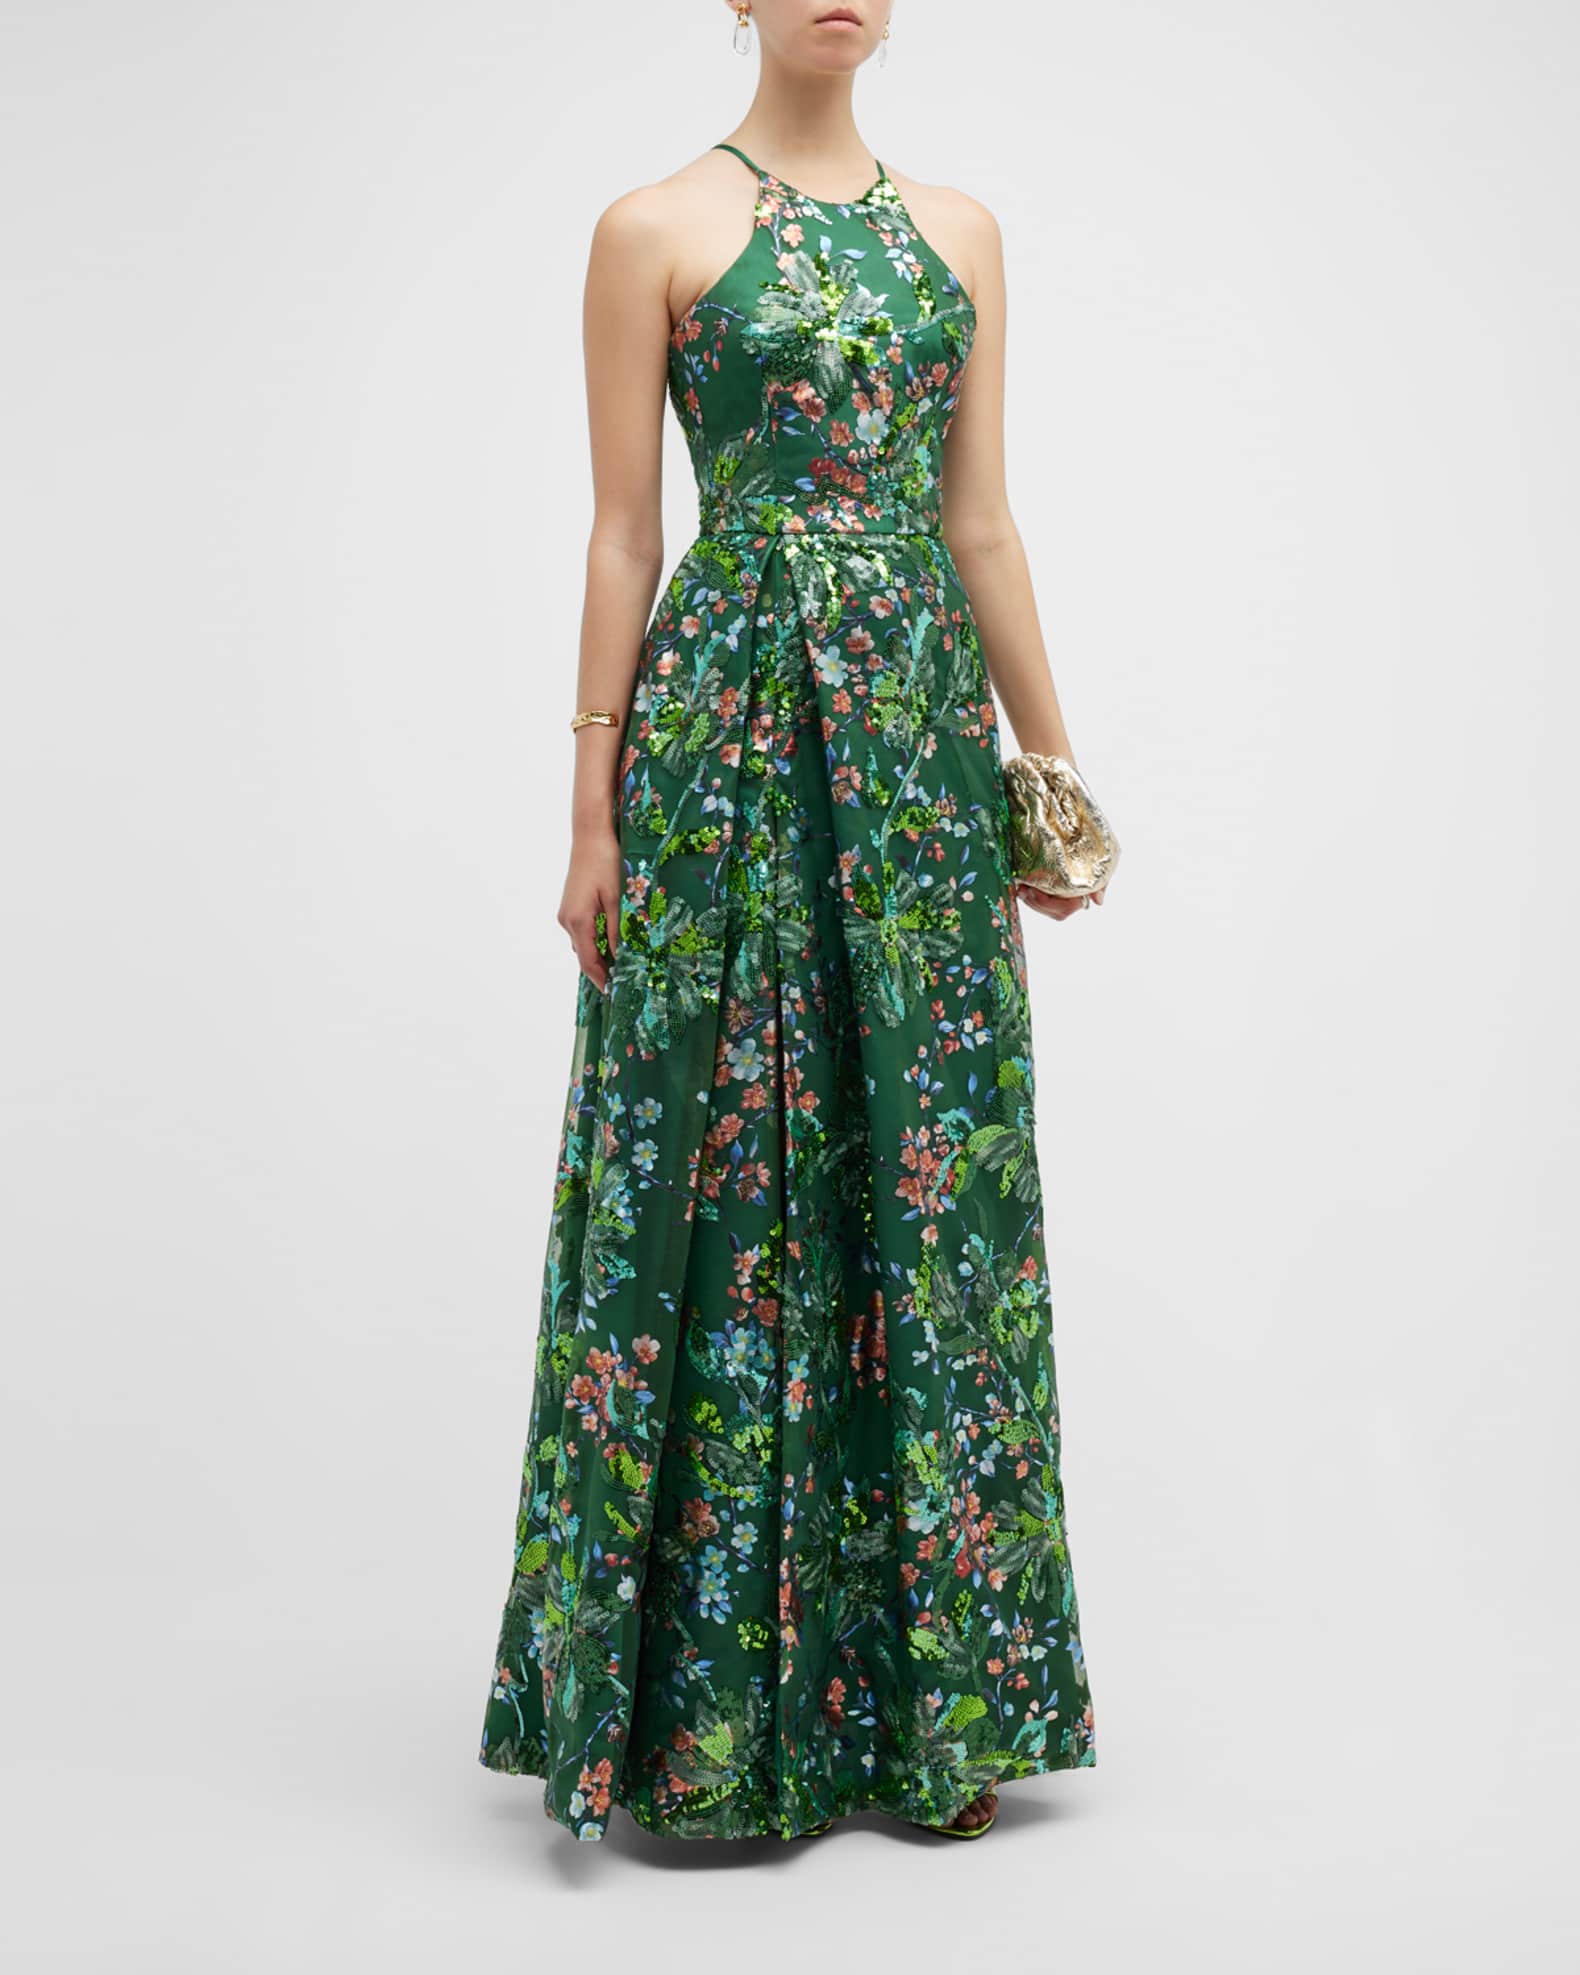 HELSI Iris Embellished Floral Evening Gown | Neiman Marcus